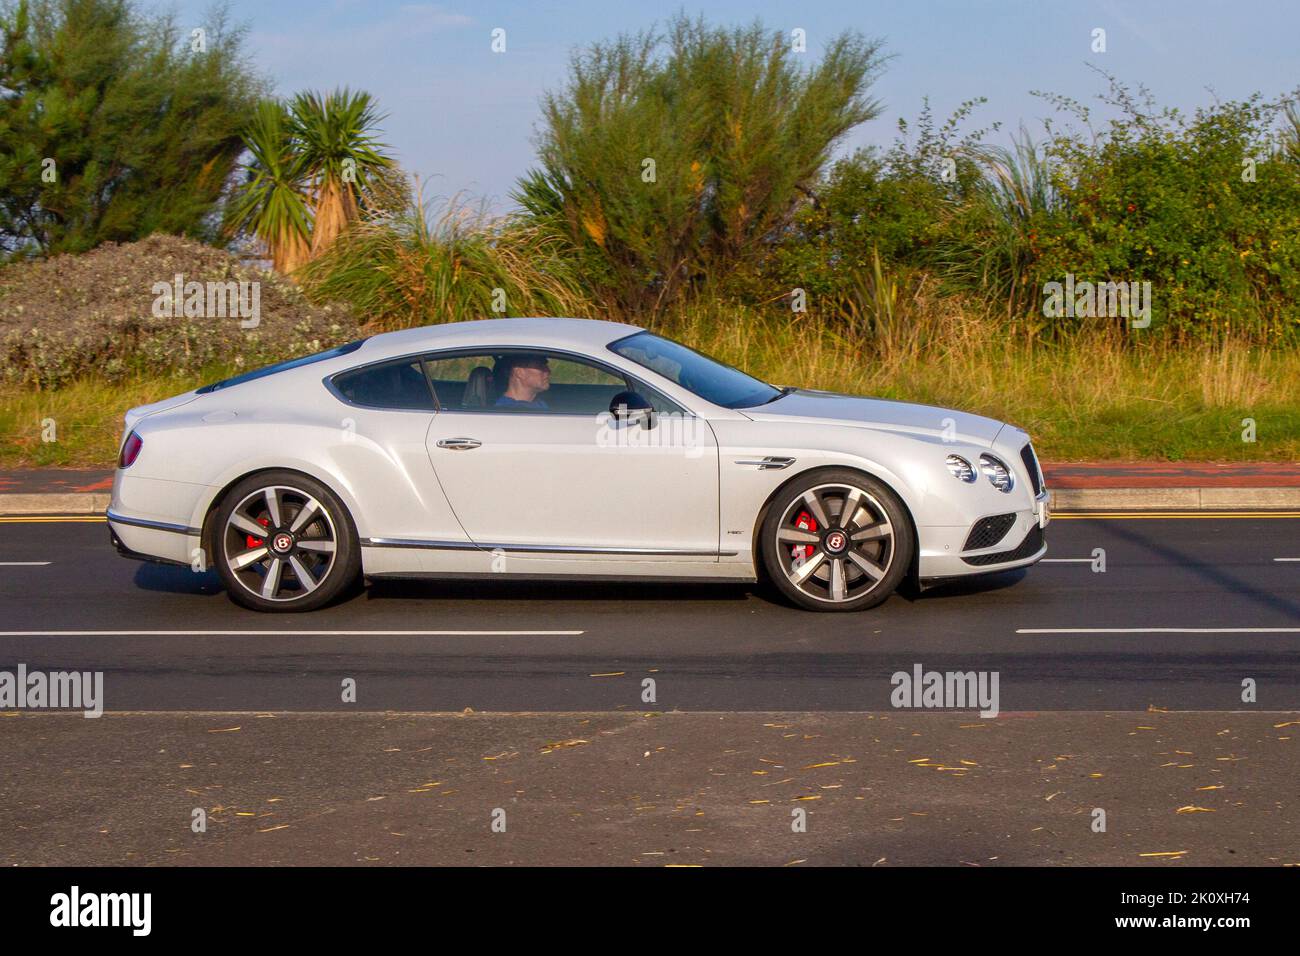 2017 Grey White BENTLEY CONTINENTAL 3993cc 8 speed automatic travelling on the seafront promenade in Southport, UK Stock Photo